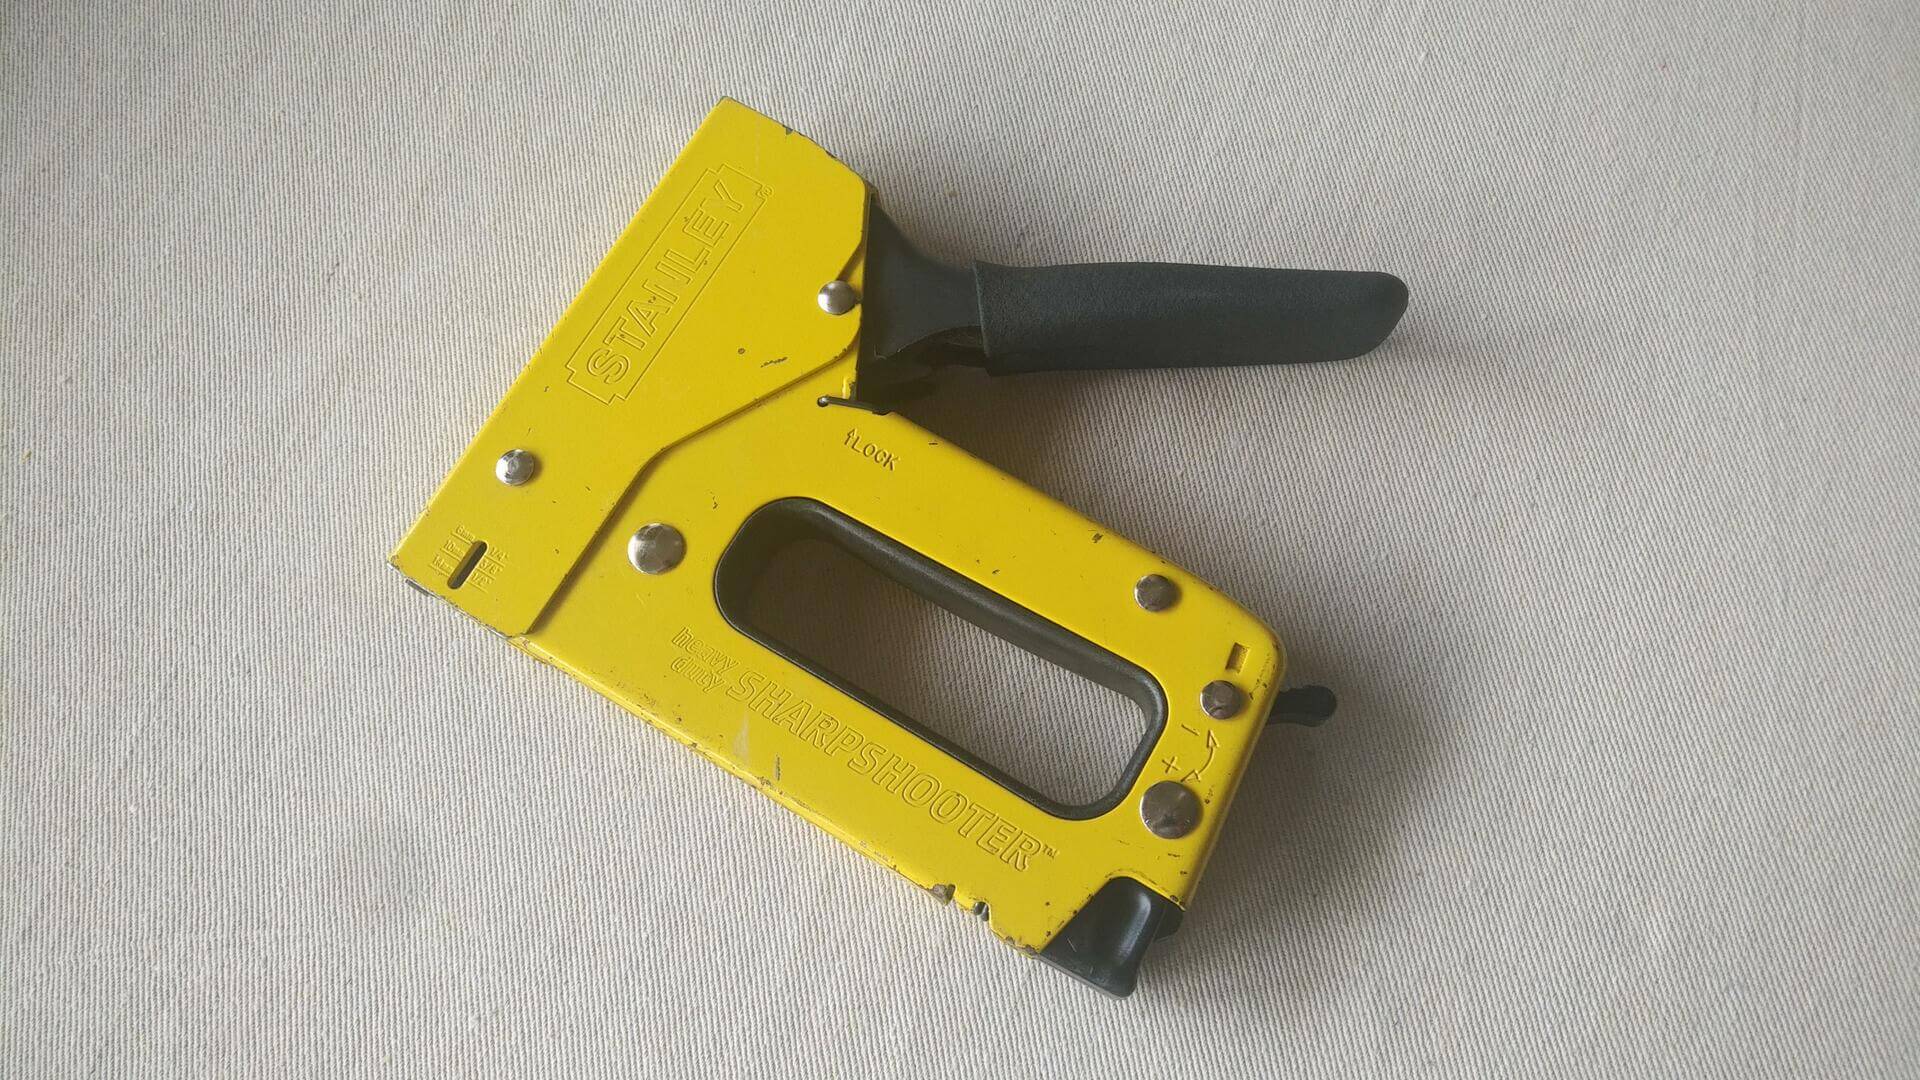 Rare vintage Stanley heavy duty Sharpshooter manual staple gun TR100 in yellow colour. Quality made in USA construction and upholstery nail and staple gun